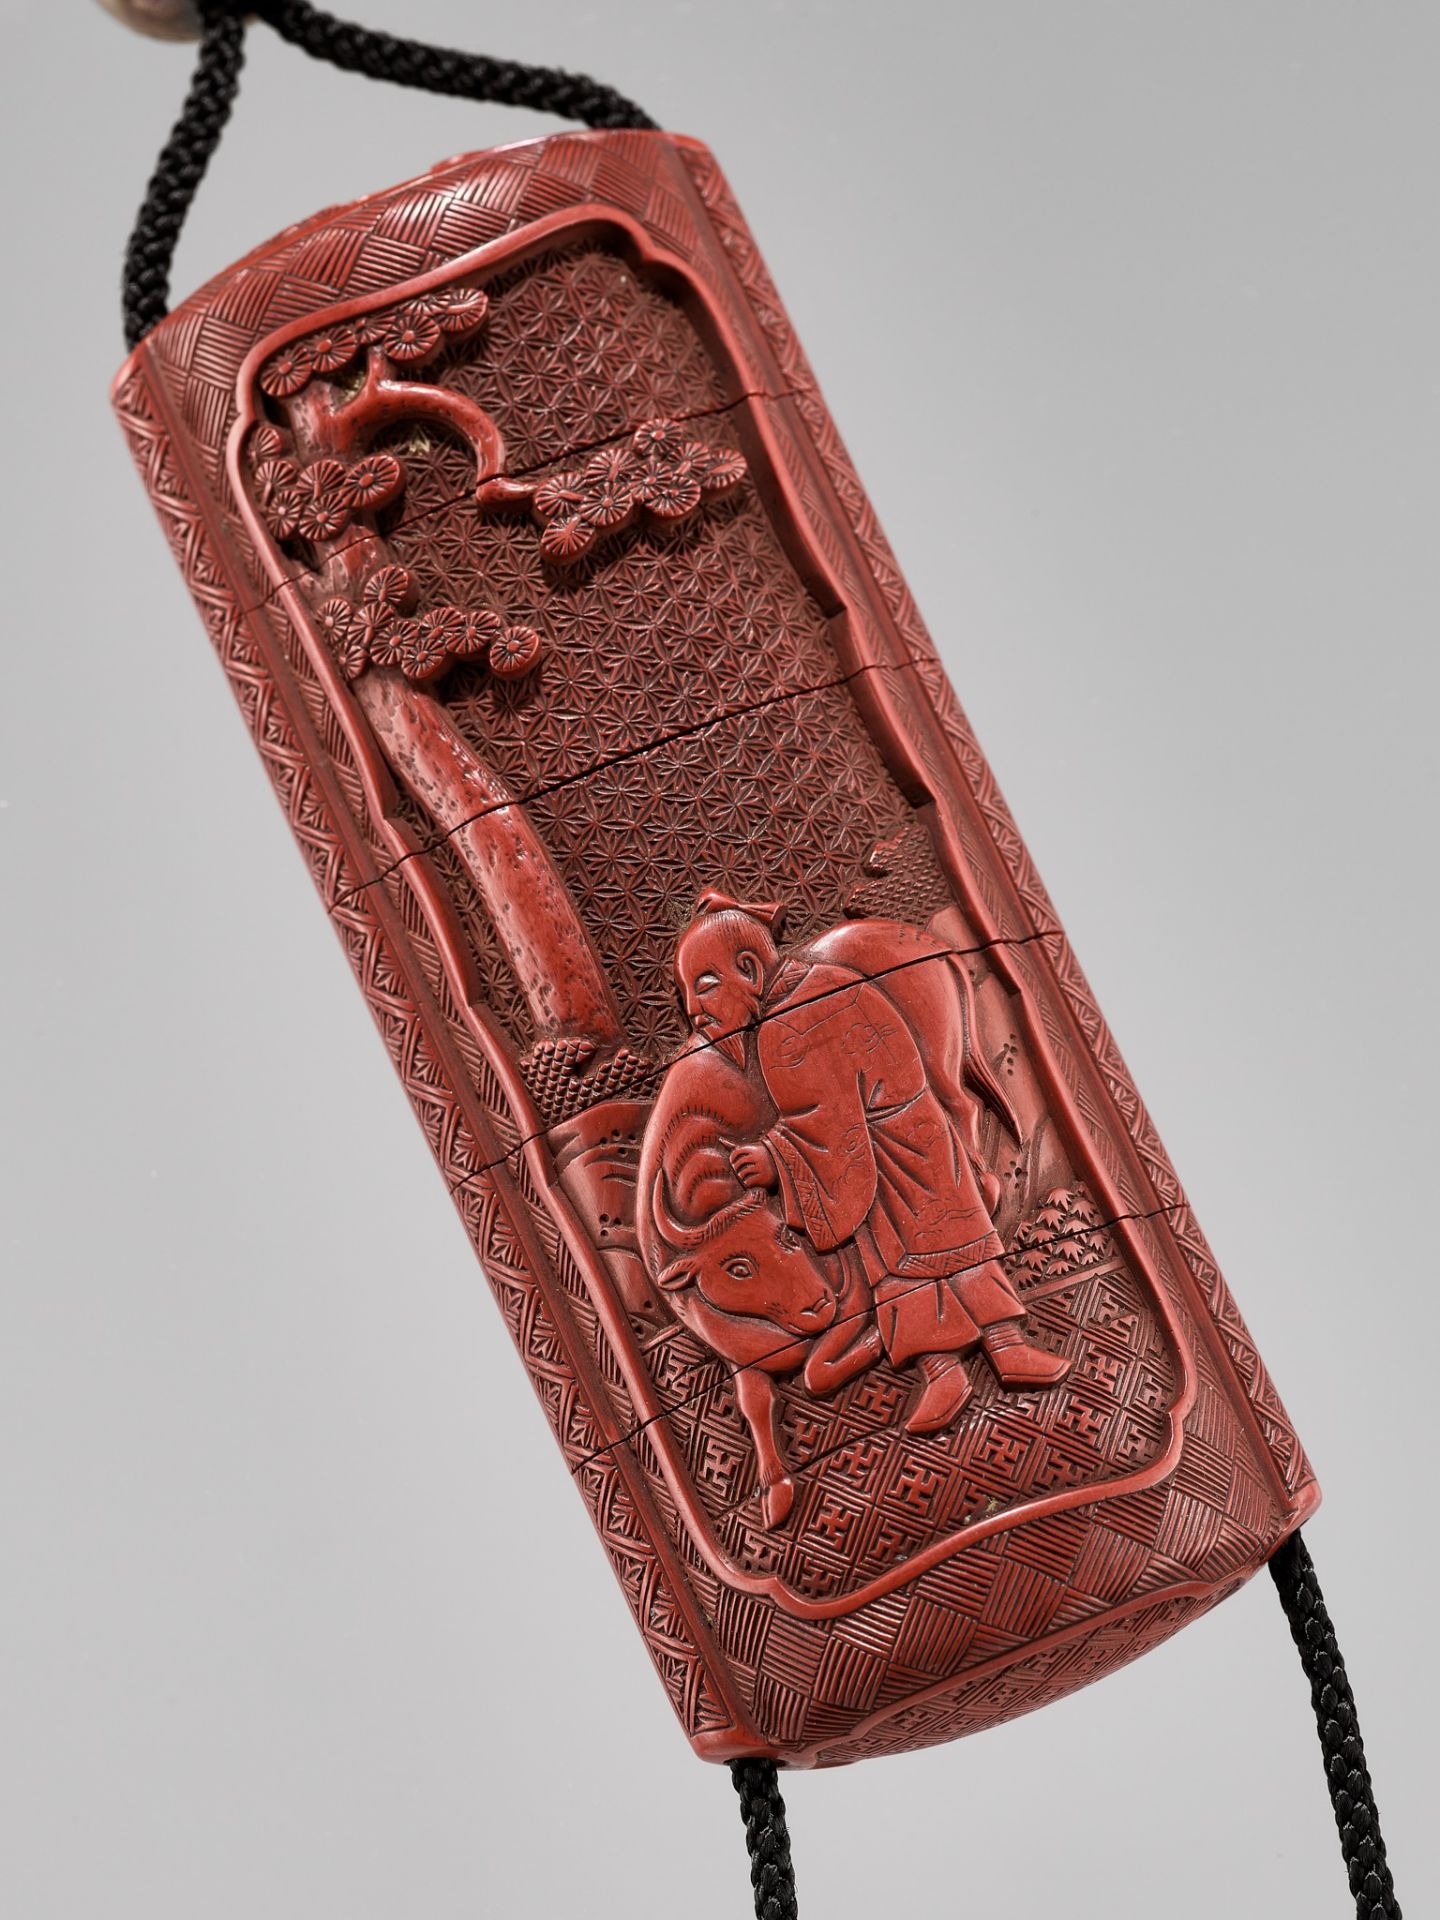 A TSUISHU LACQUER FOUR-CASE INRO DEPICTING KYOYU AND SOFU, WITH EN SUITE NETSUKE AND OJIME - Image 3 of 9